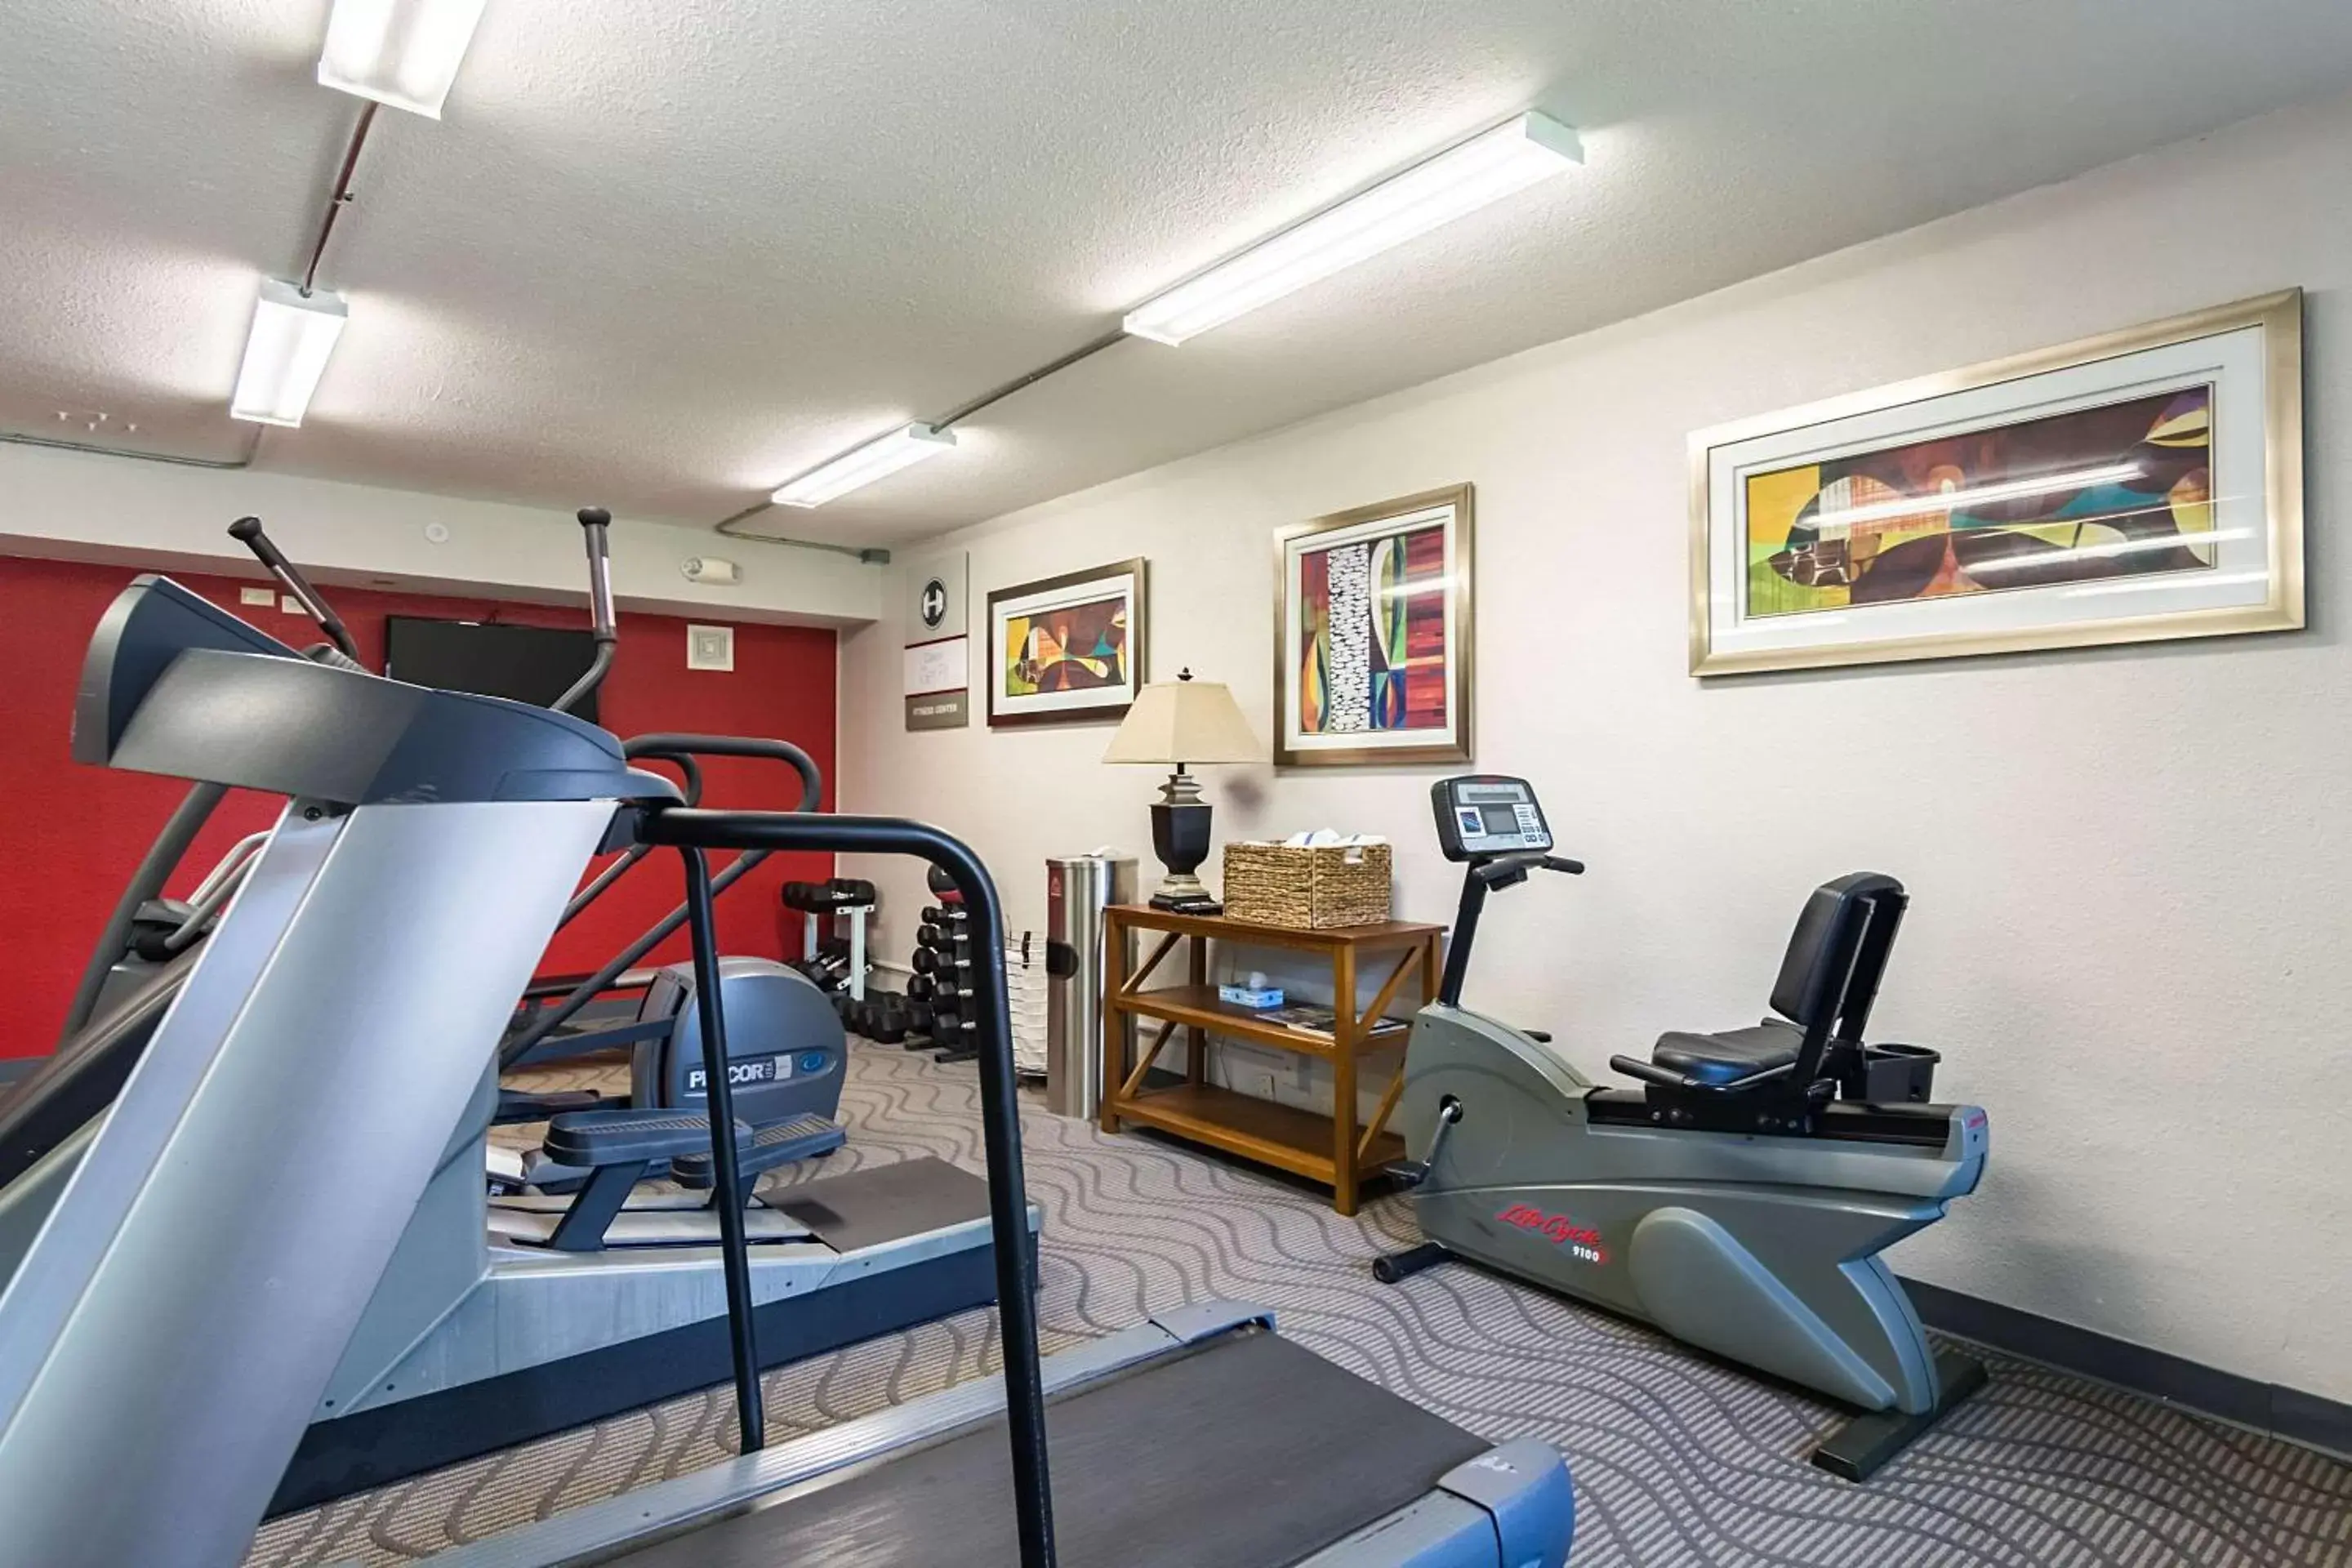 Fitness centre/facilities, Fitness Center/Facilities in Clarion Inn & Suites Russellville I-40